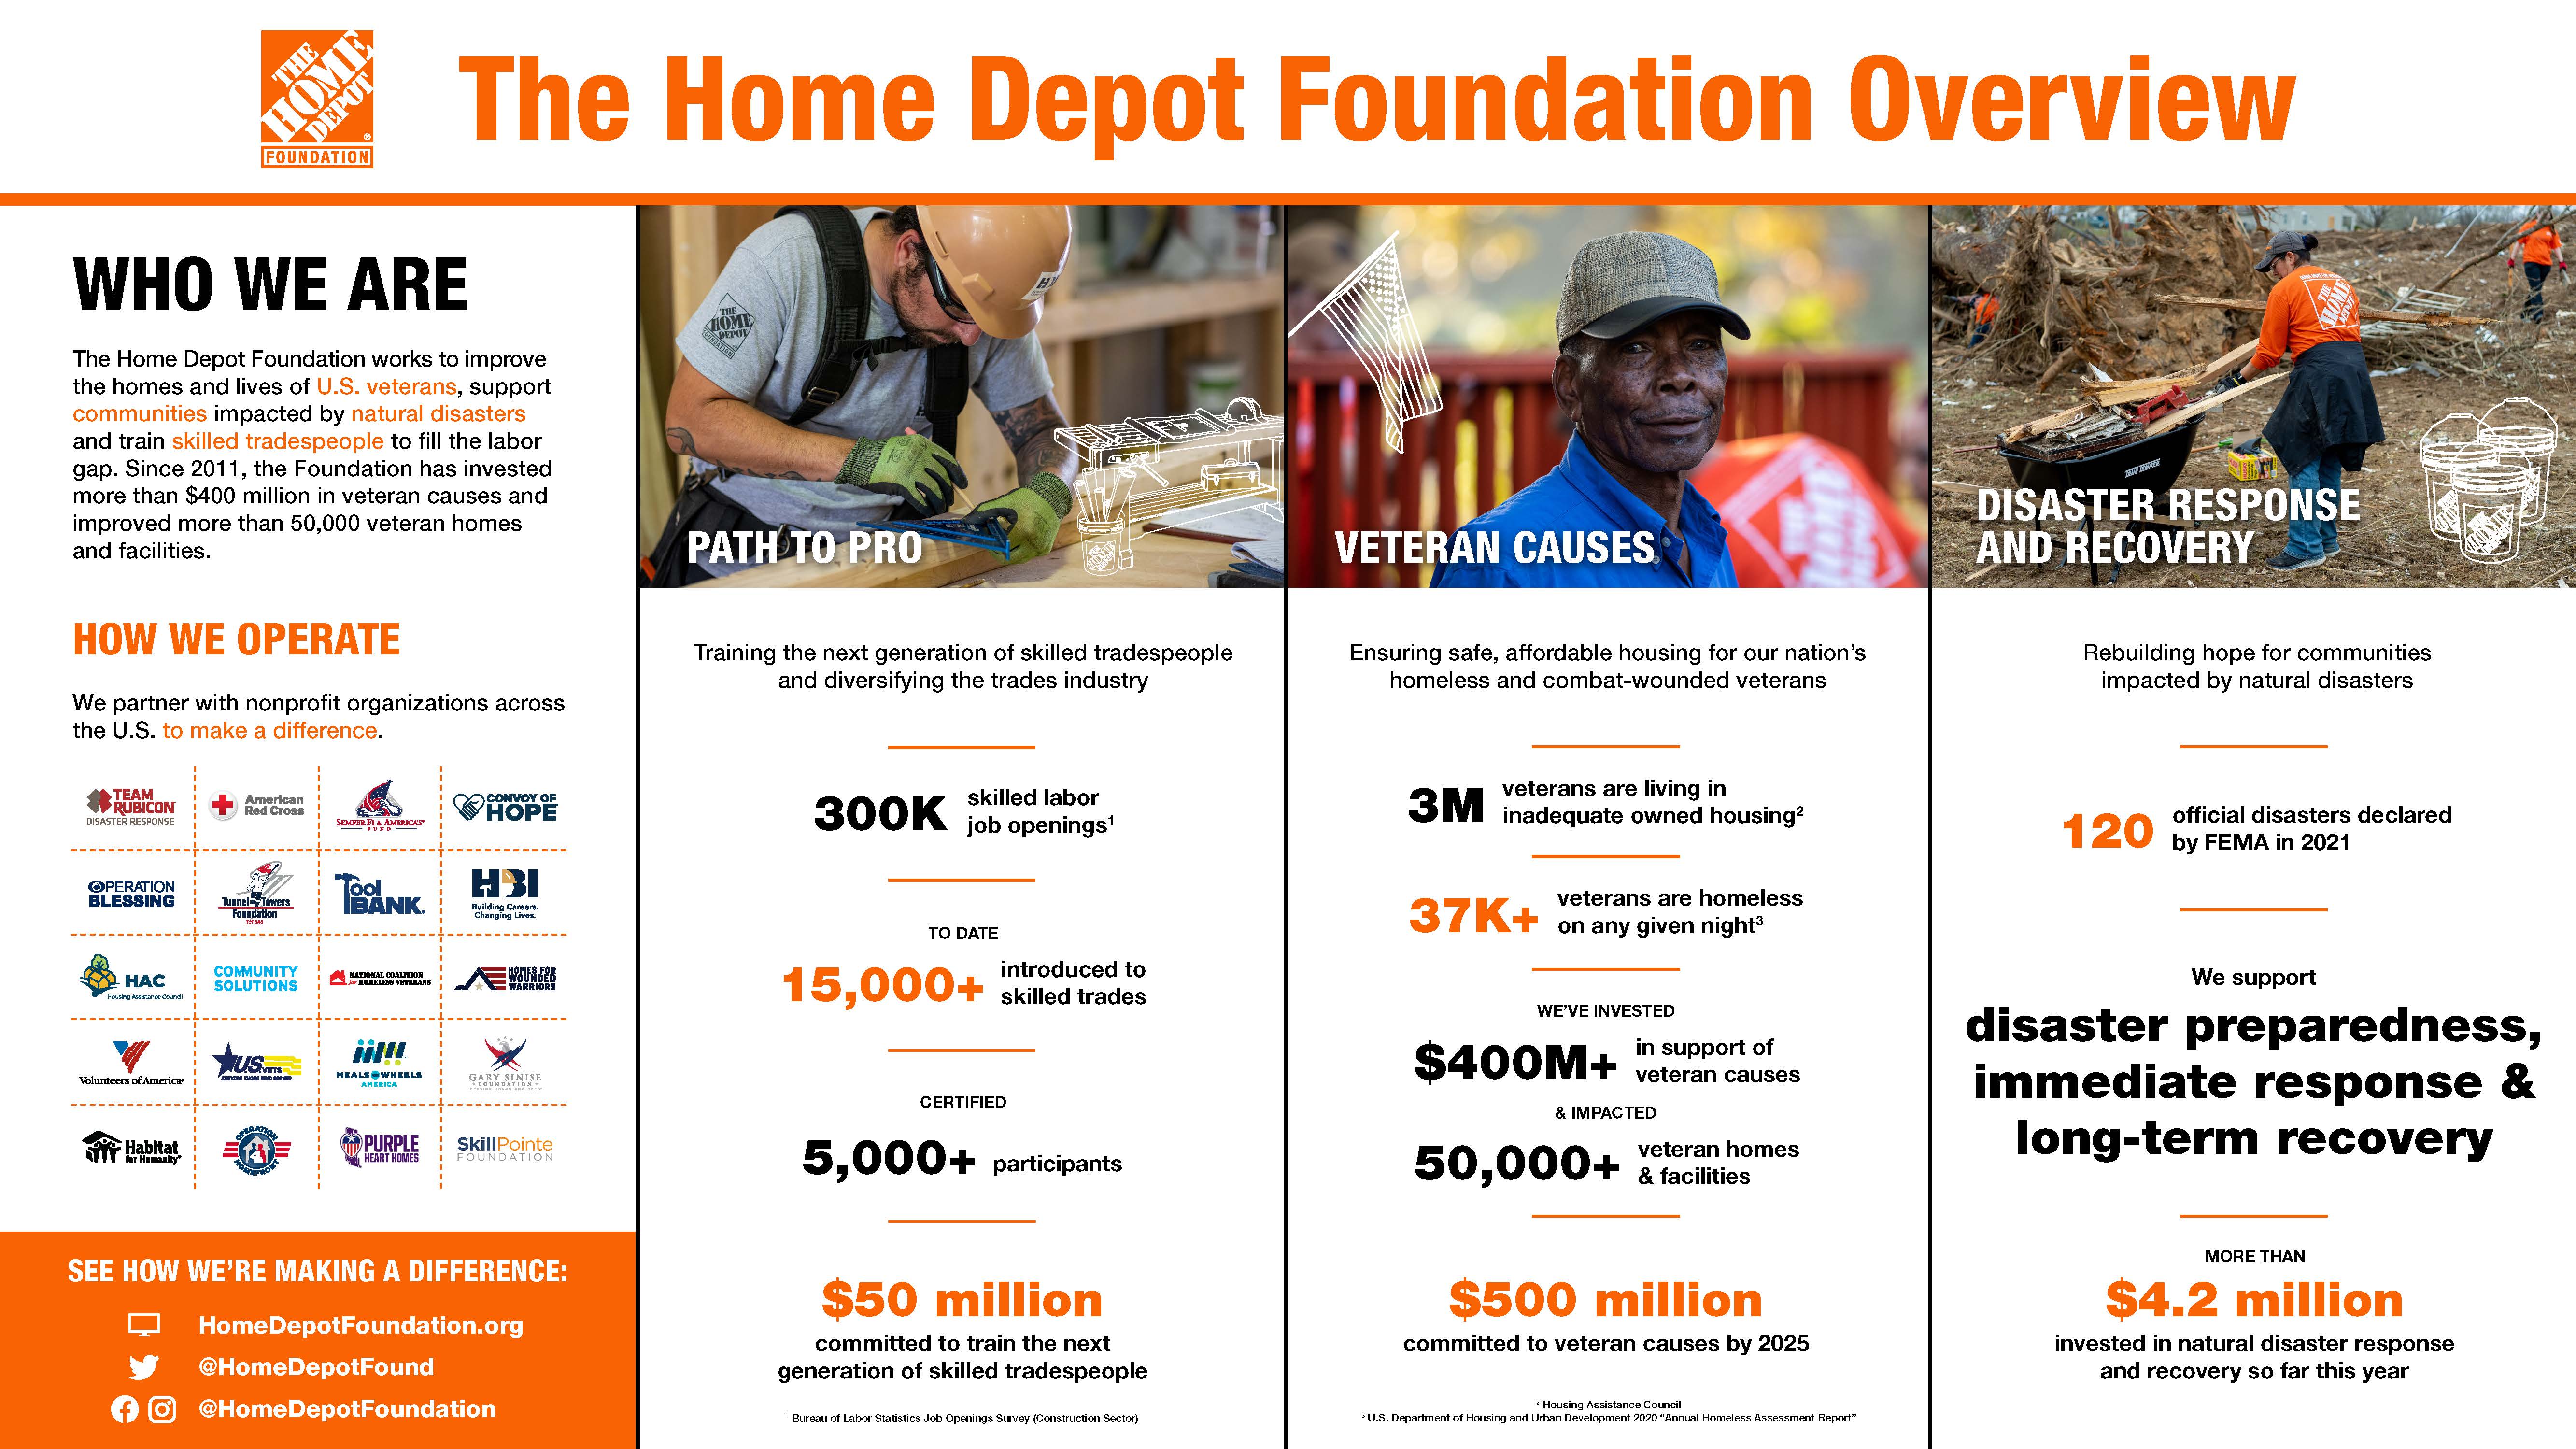 The Home Depot Foundation Overview